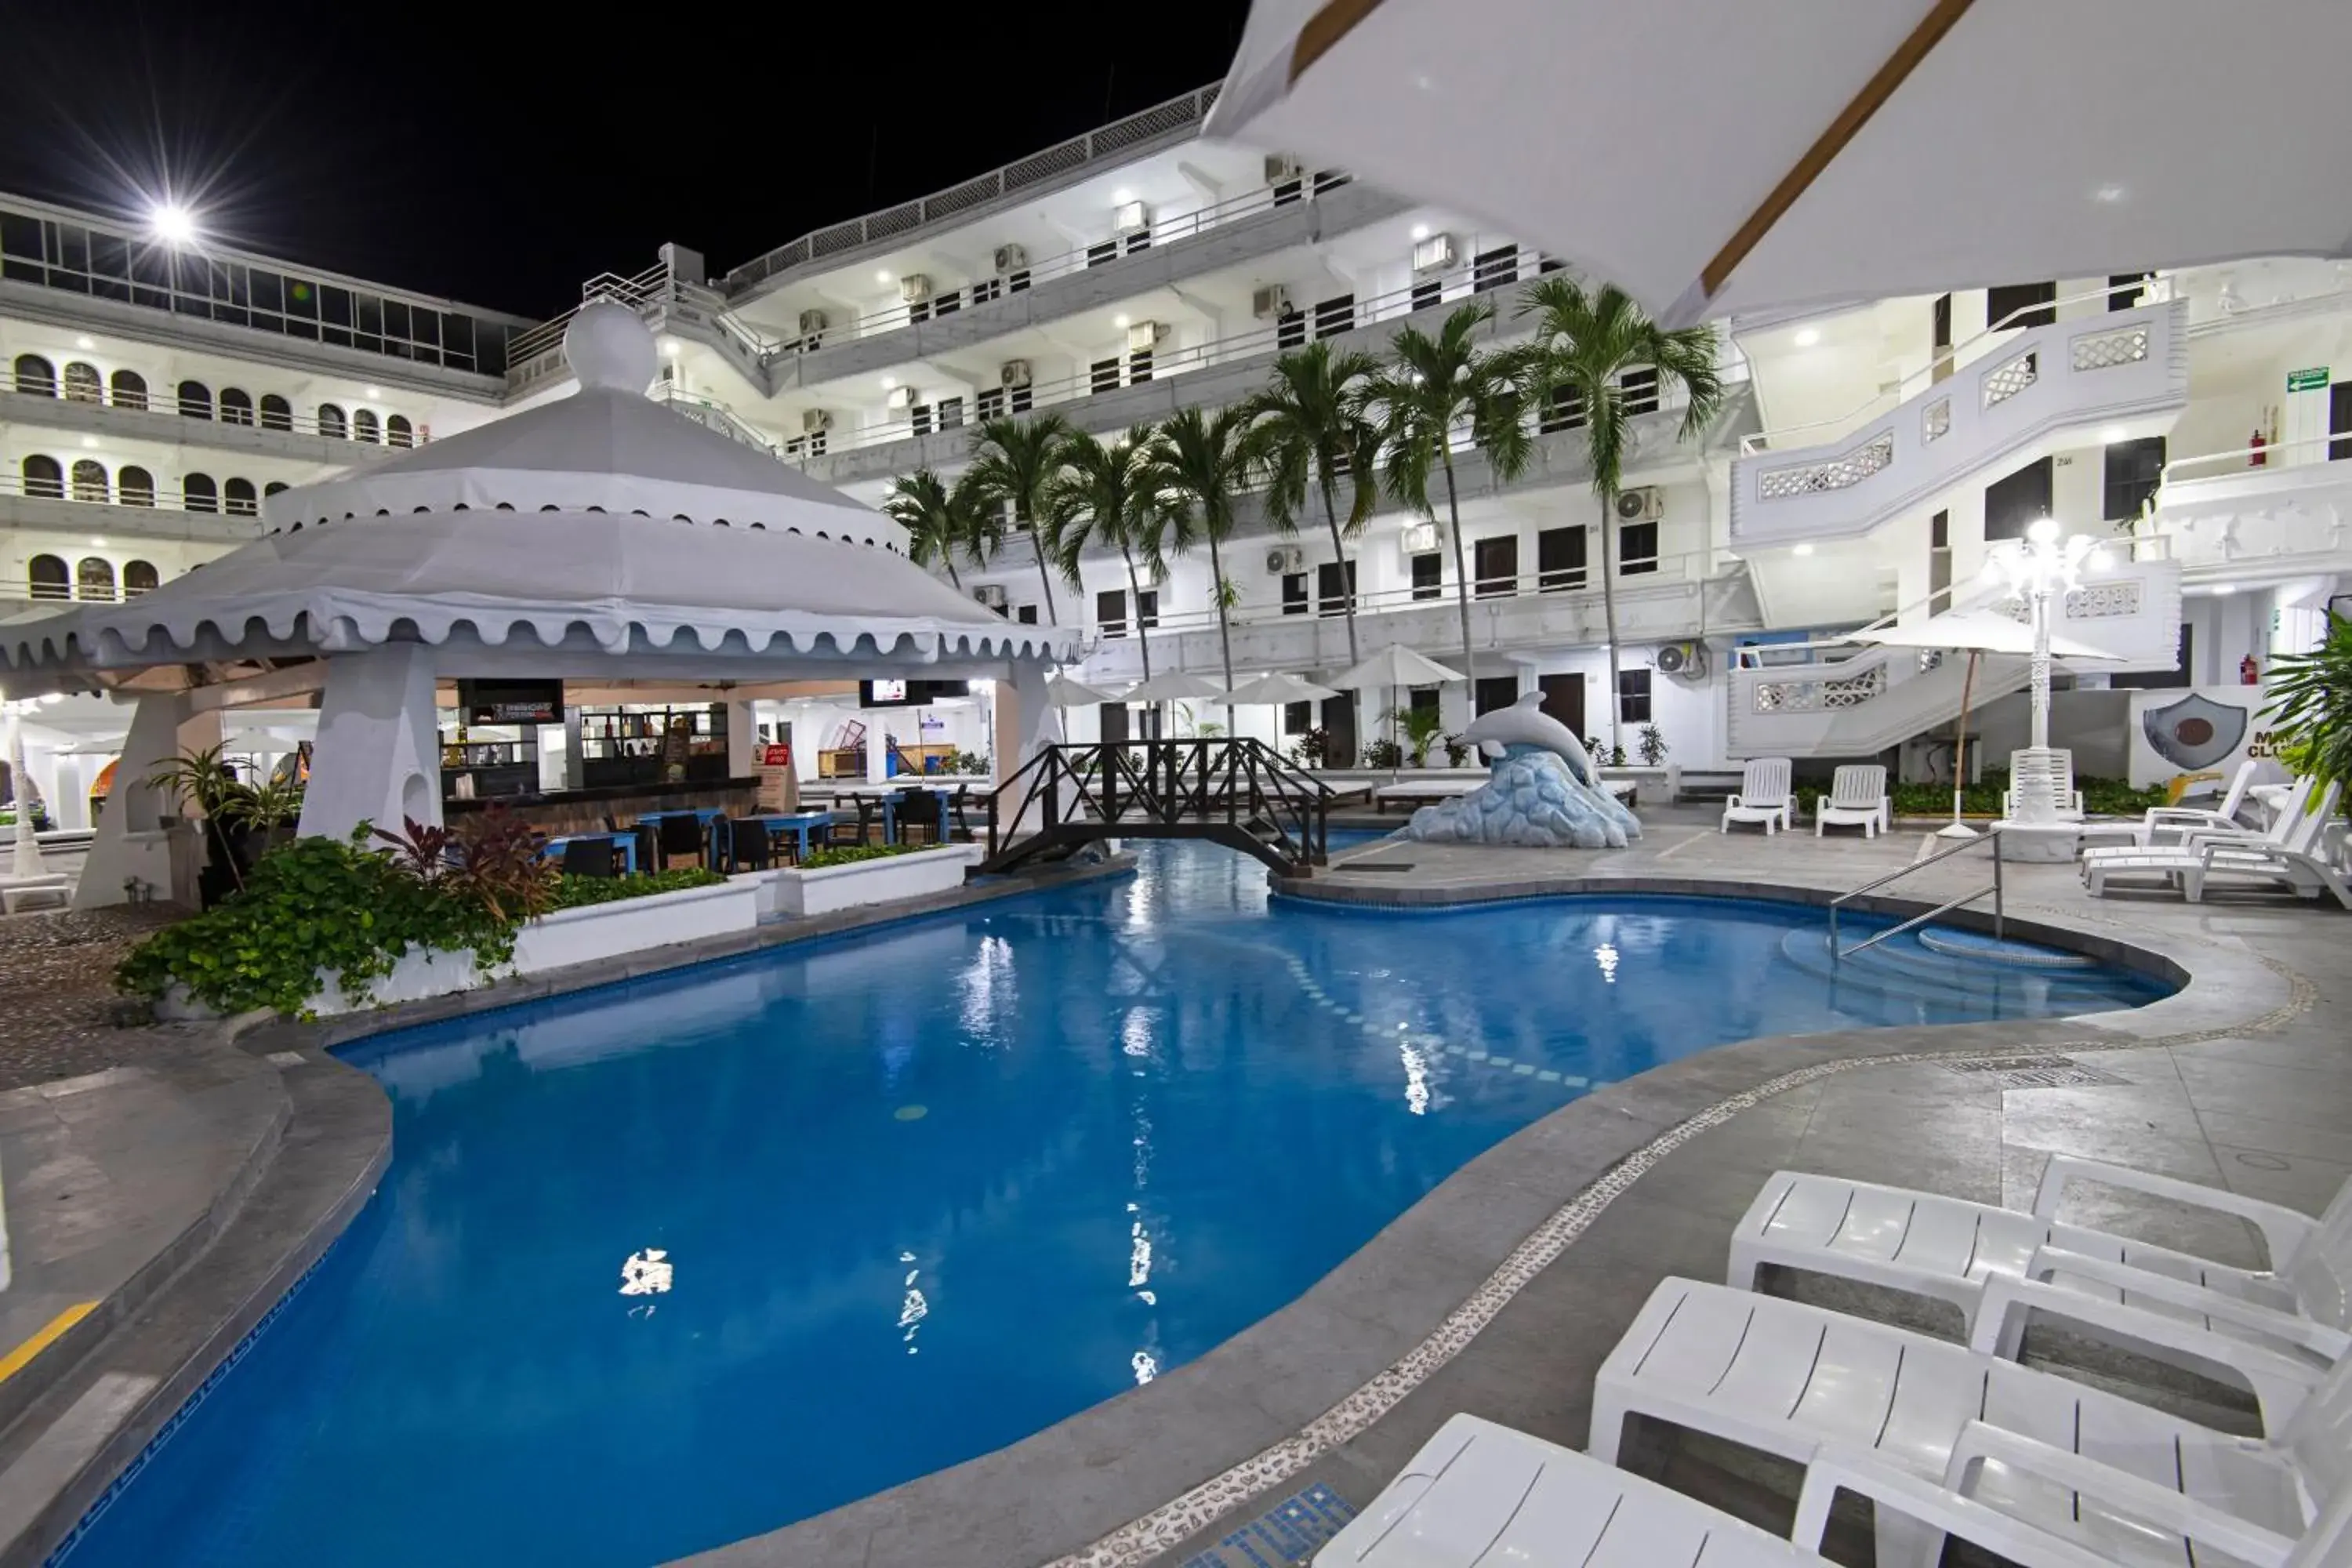 Property building, Swimming Pool in Hotel Fiesta Mexicana